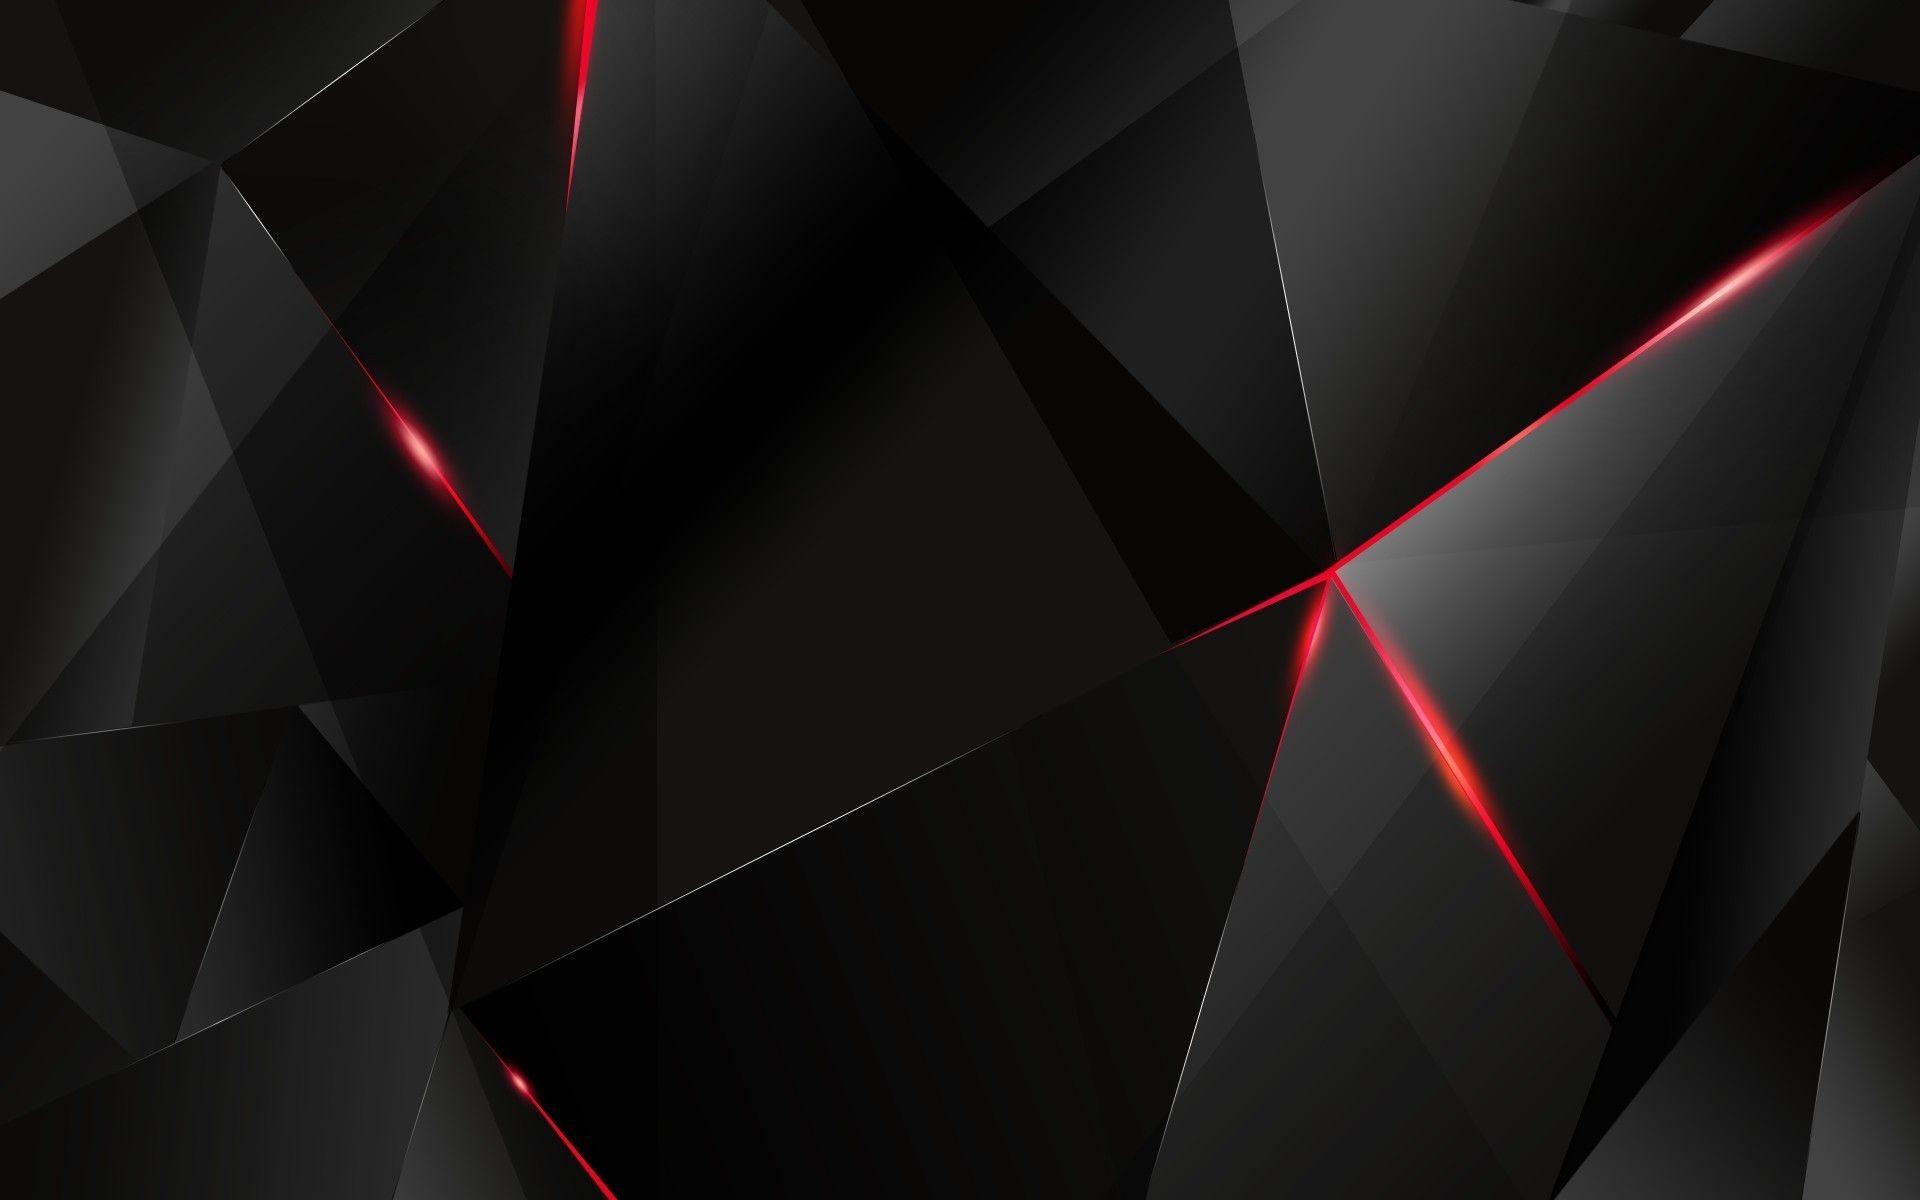 Black and Red Wallpaper 27653 1920x1200 px